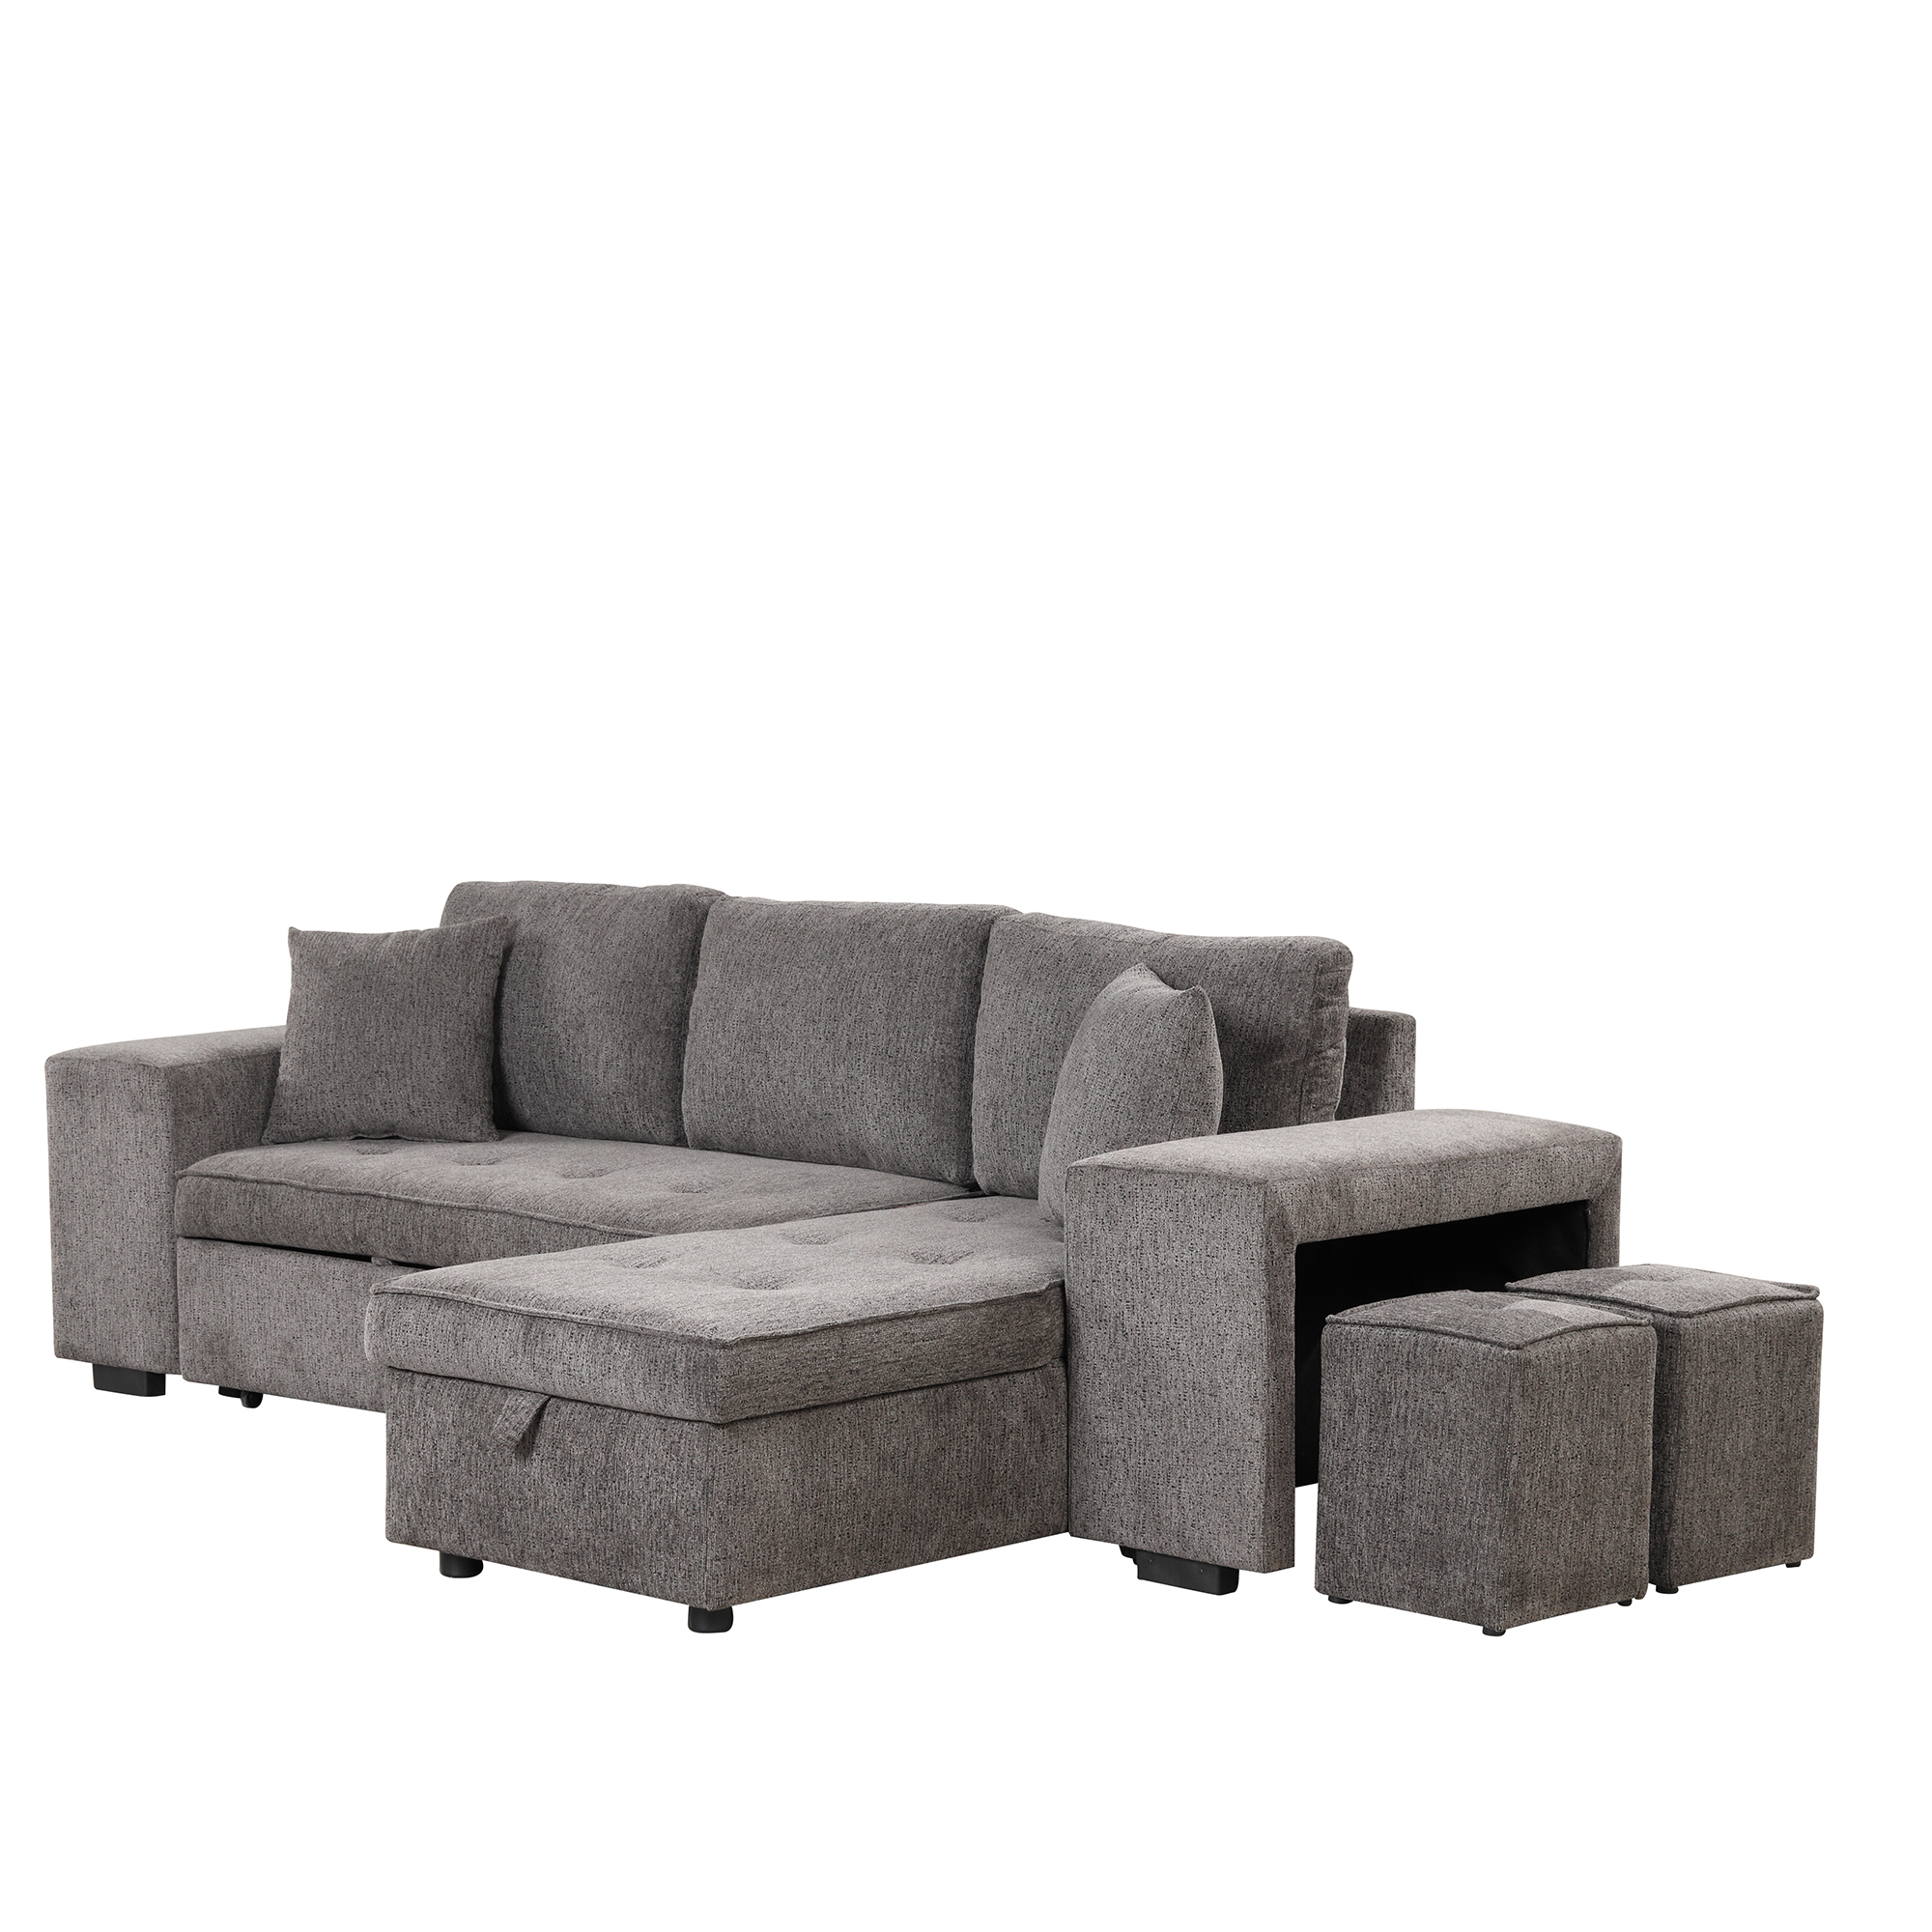 L-Shape 3 Seat Reversible Sectional Sofa With Storage Chaise And 2 Stools - SG000431AAA